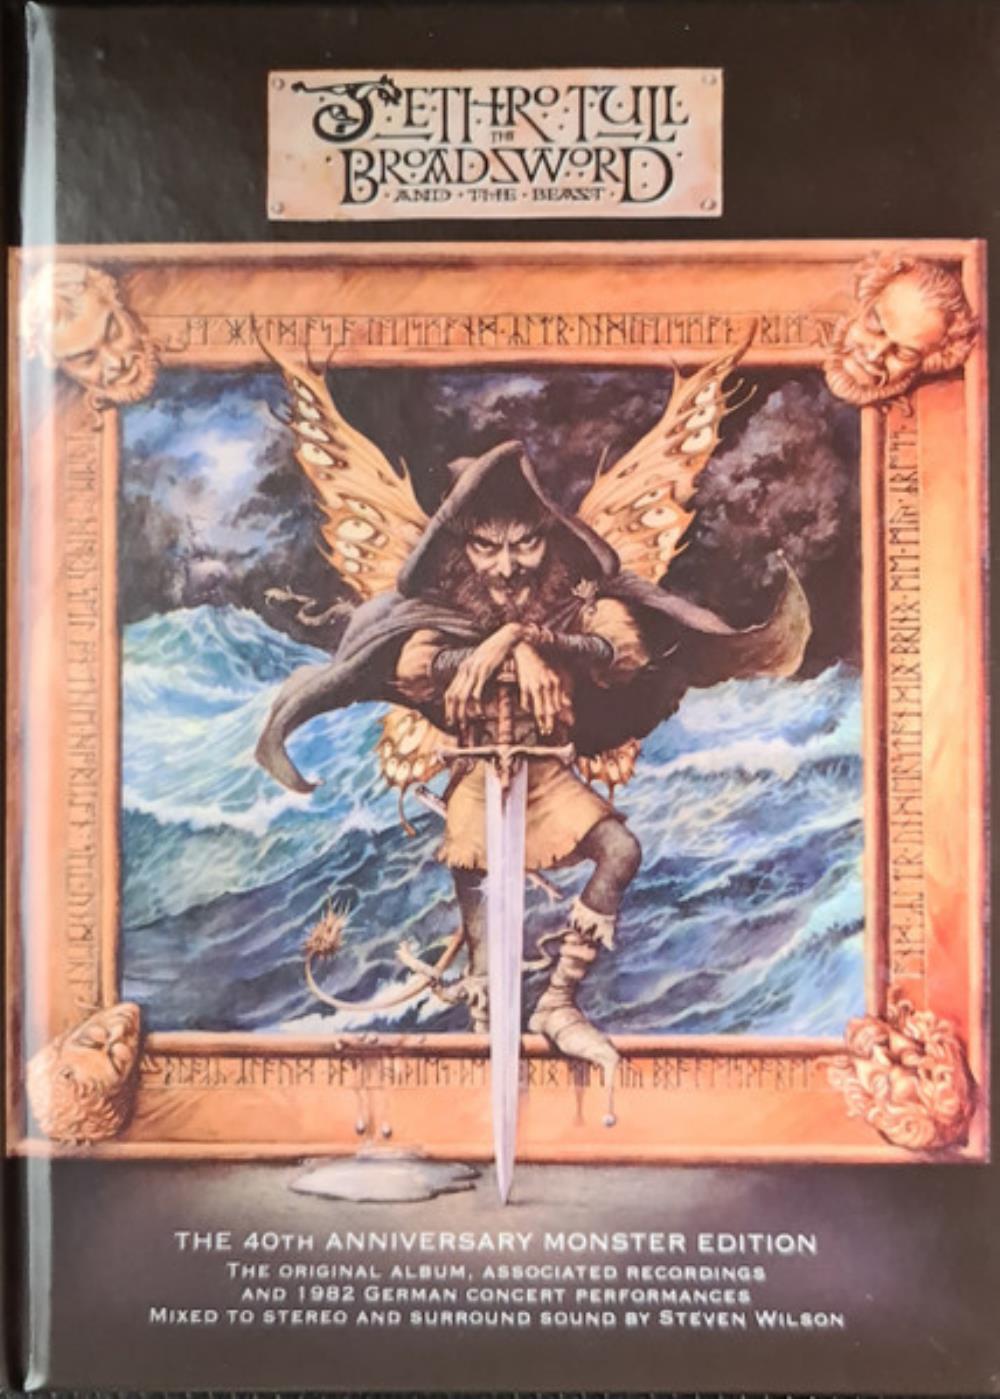 Jethro Tull The Broadsword And The Beast (The 40th Anniversary Monster Edition) album cover